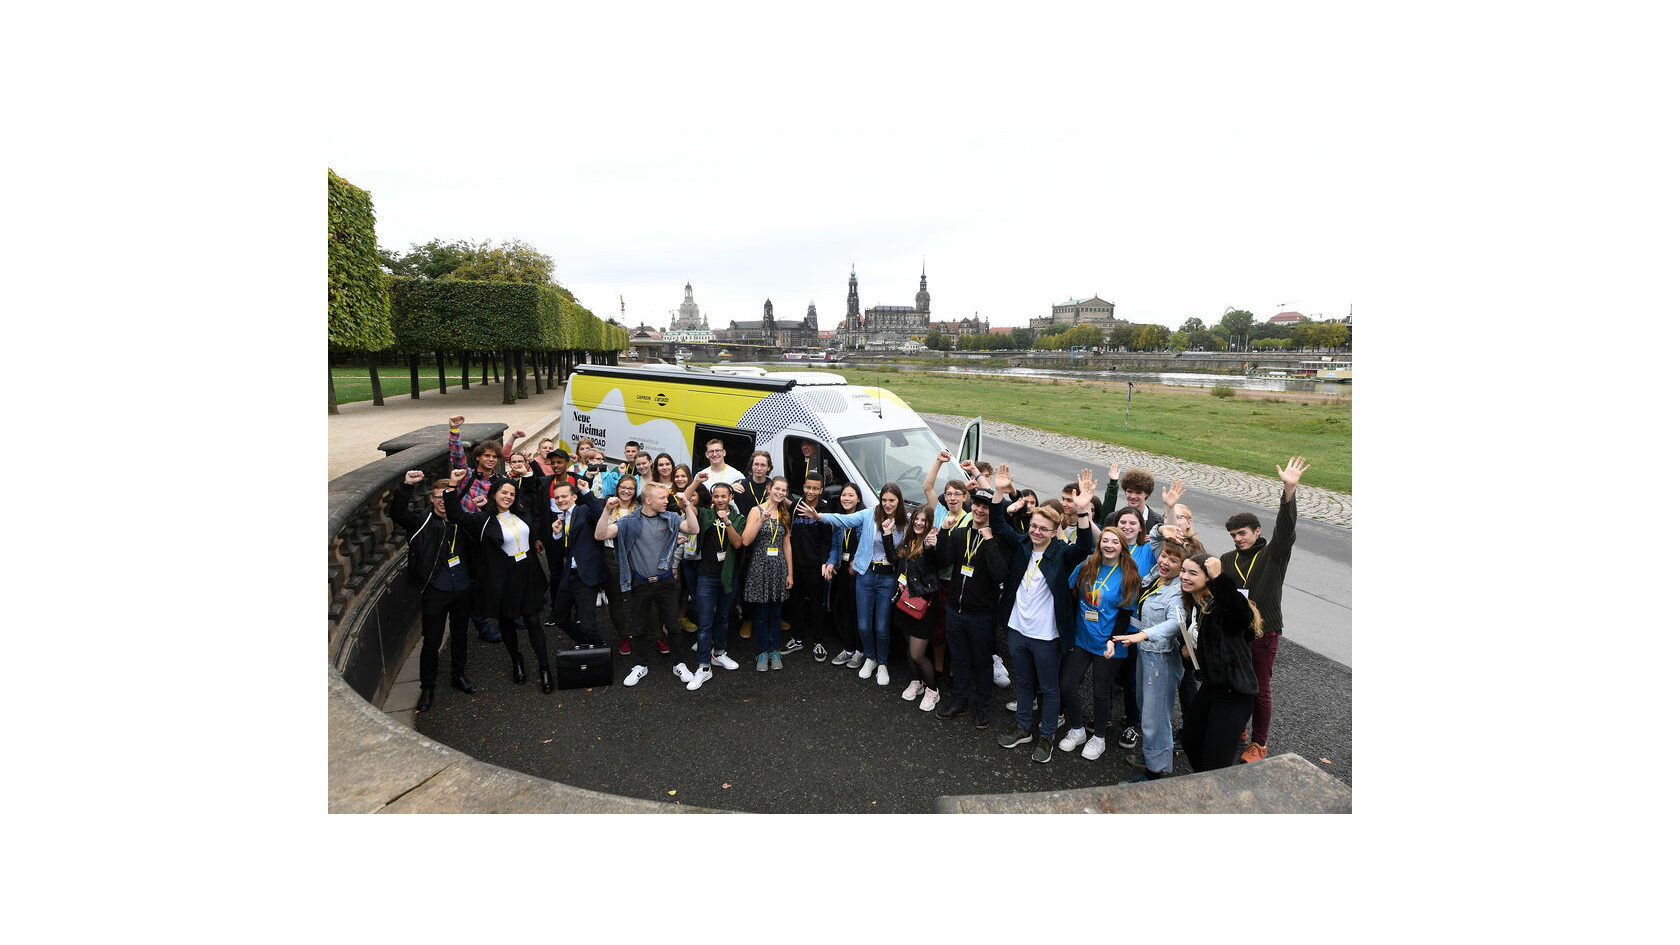 Members of the Dresden 2025 Youth Council wave at the camera on the banks of the Elbe river in Dresden.